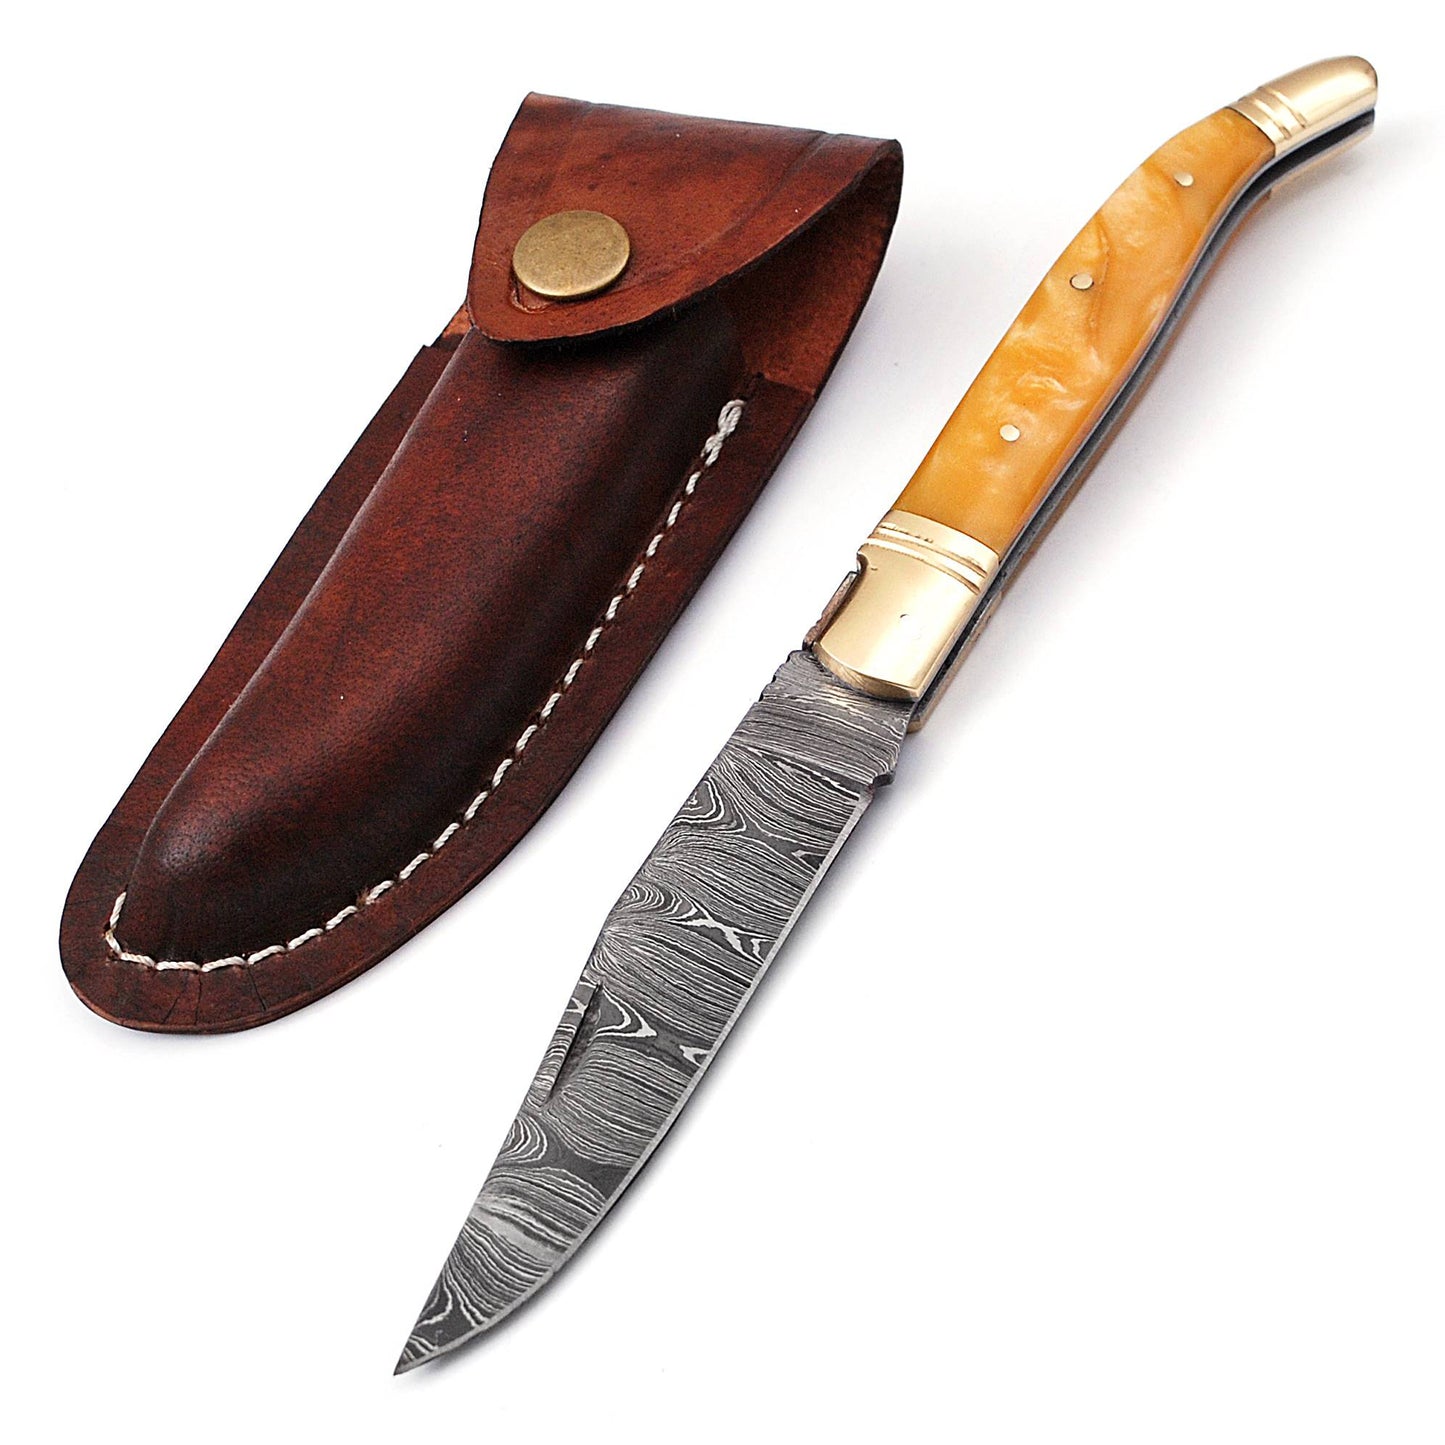 Copy of Laguiole Folding Damascus steel knife, 8.5" Long with 4" hand forged custom twist pattern Blade. Beige color unshrinkable Raisen scale with brass bolster, Cow hide leather sheath included